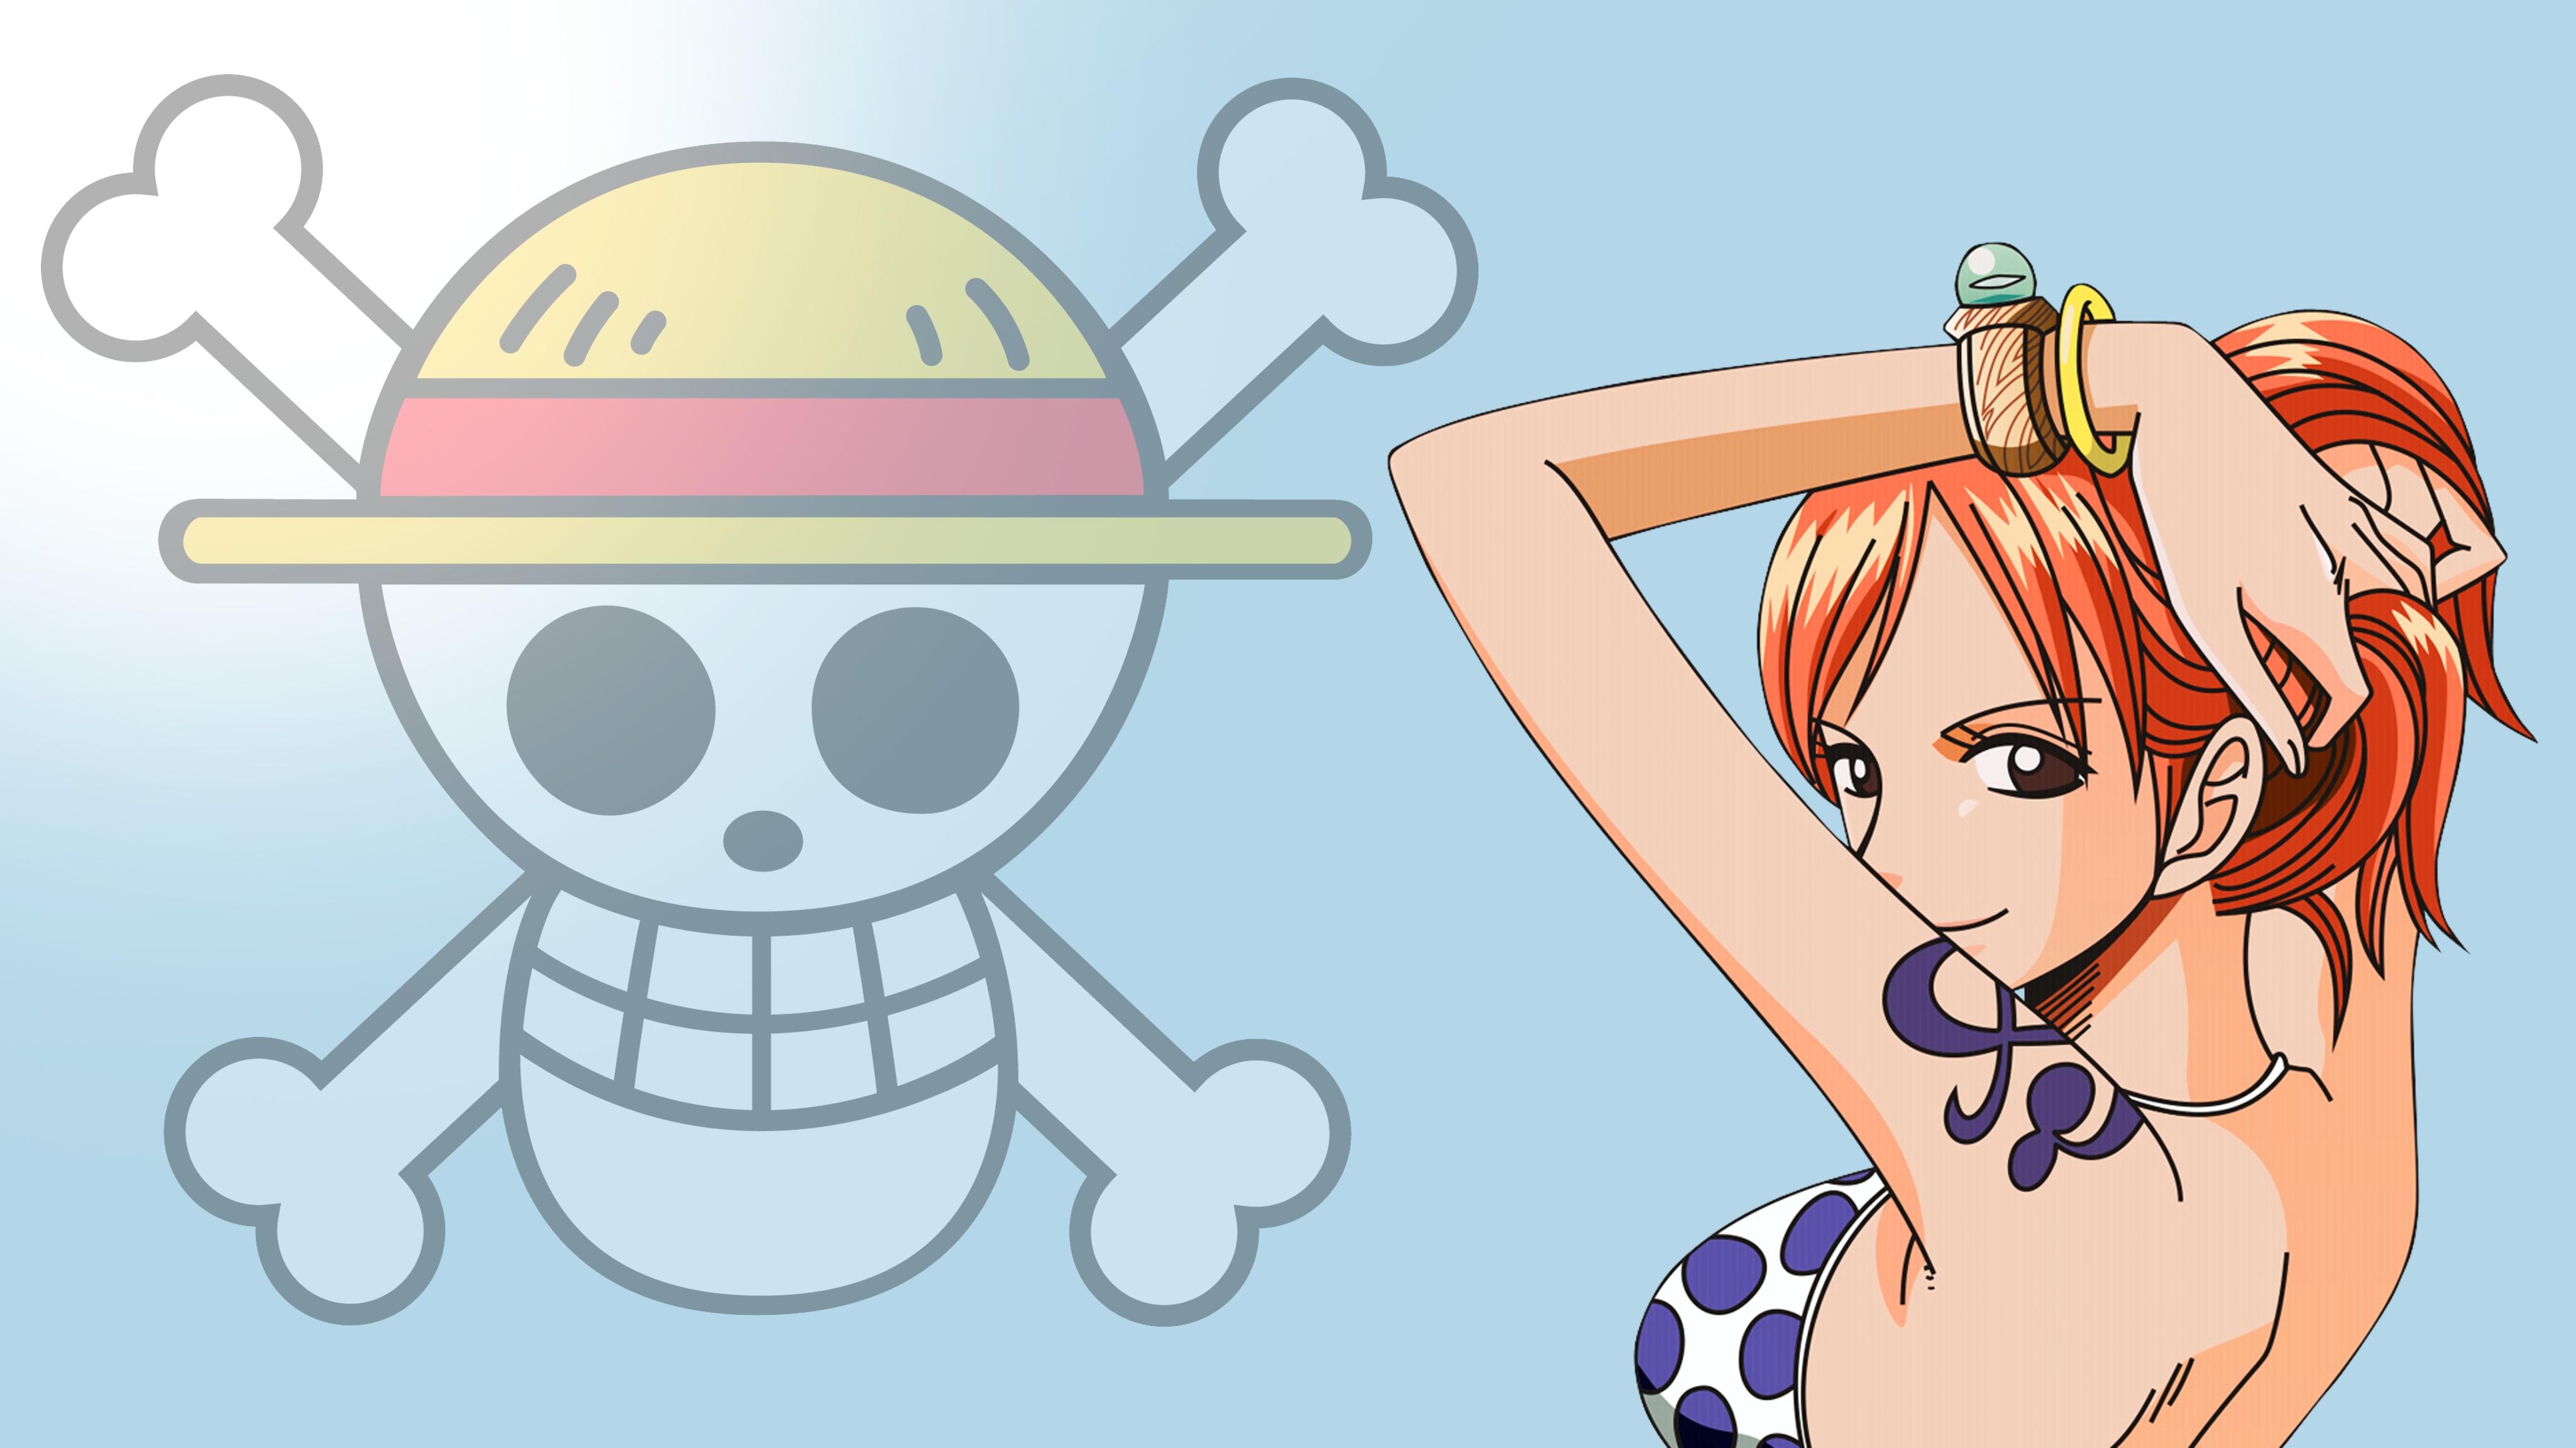 Wallpaper ID 452990  Anime One Piece Phone Wallpaper Nami One Piece  720x1280 free download